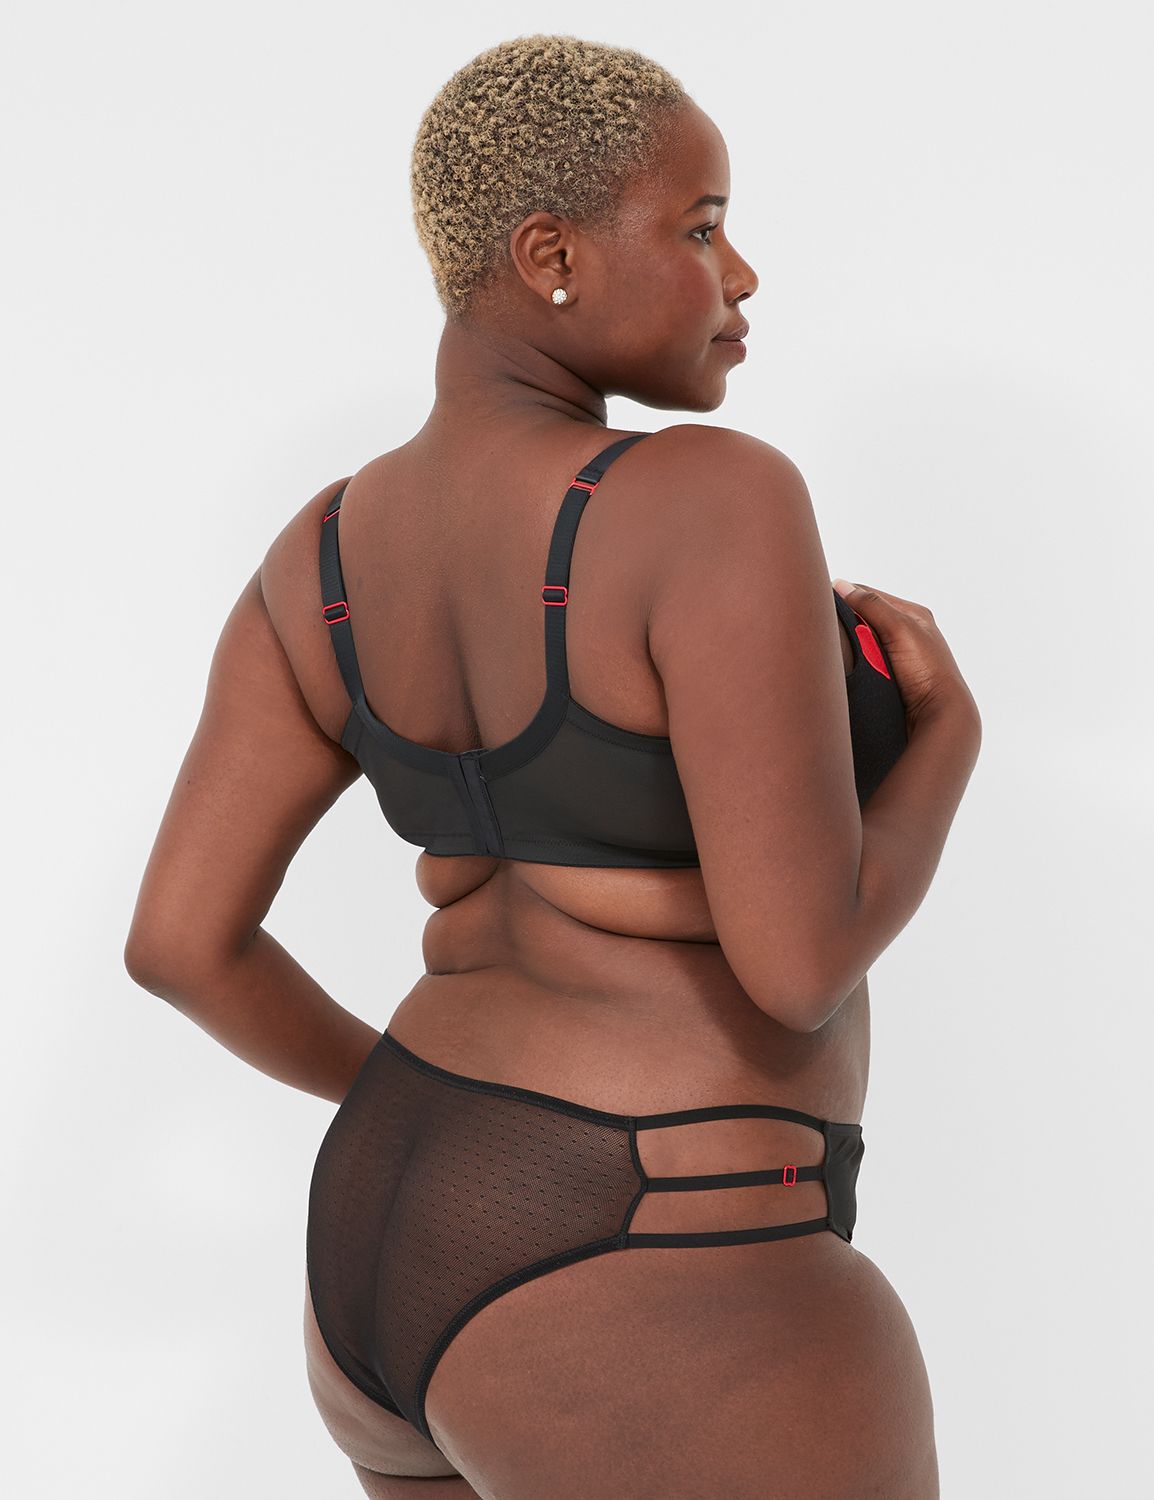 Lane Bryant - We recommend spending every Sunday in a silky-smooth  Seriously Sexy set 😉 Grab a Seriously Sexy bra + panty combo (like this  one) for only $49. 💜 Shop